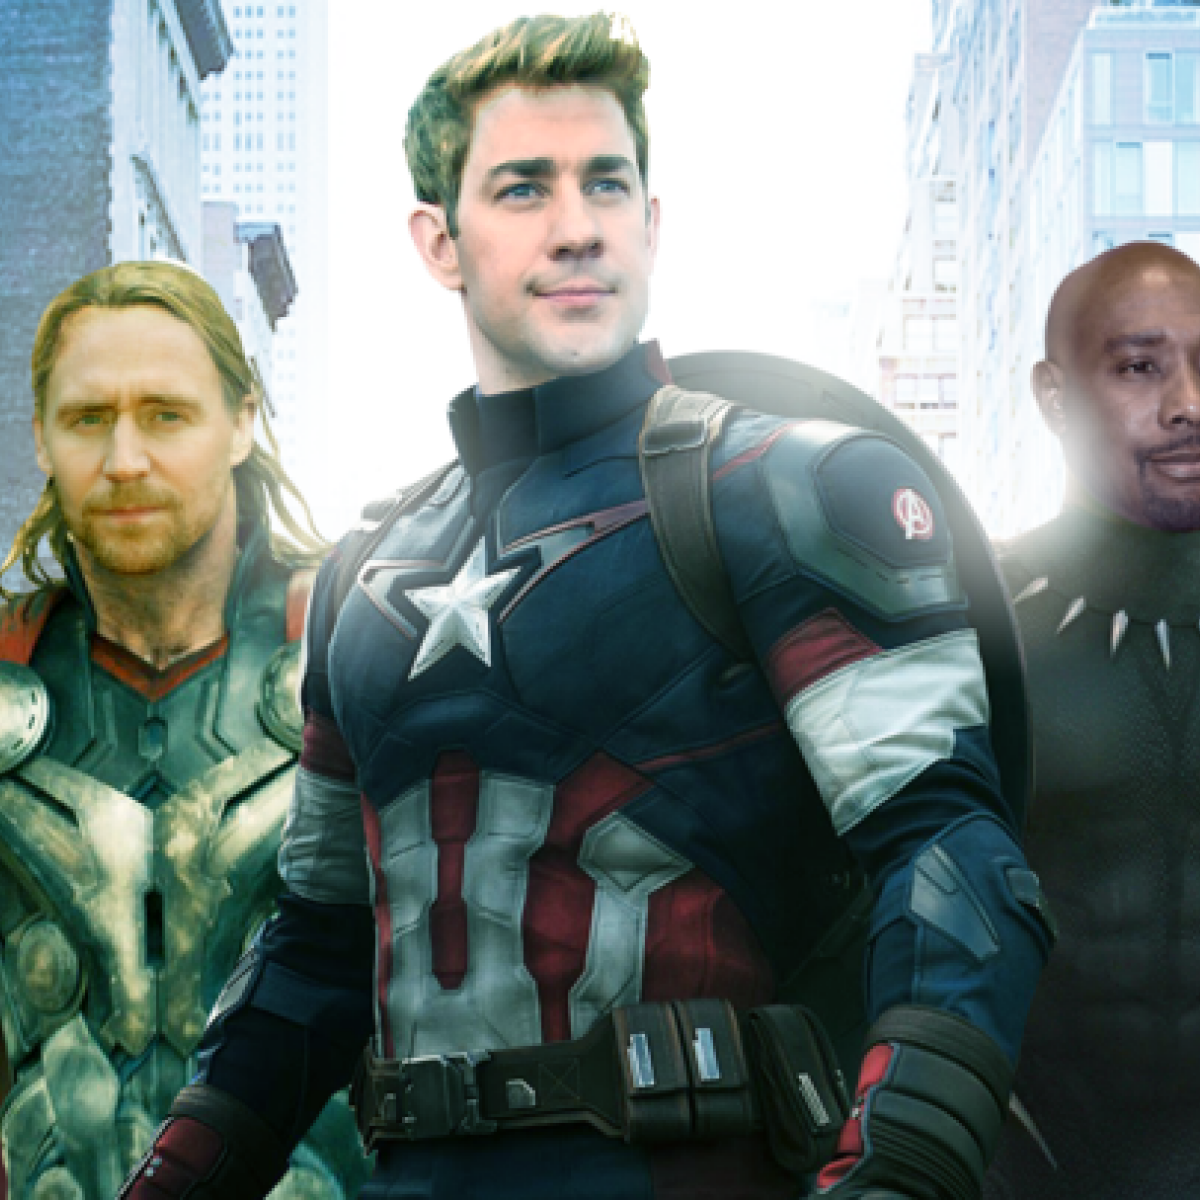 We Photohopped an alternate cast of Avengers who almost got the roles